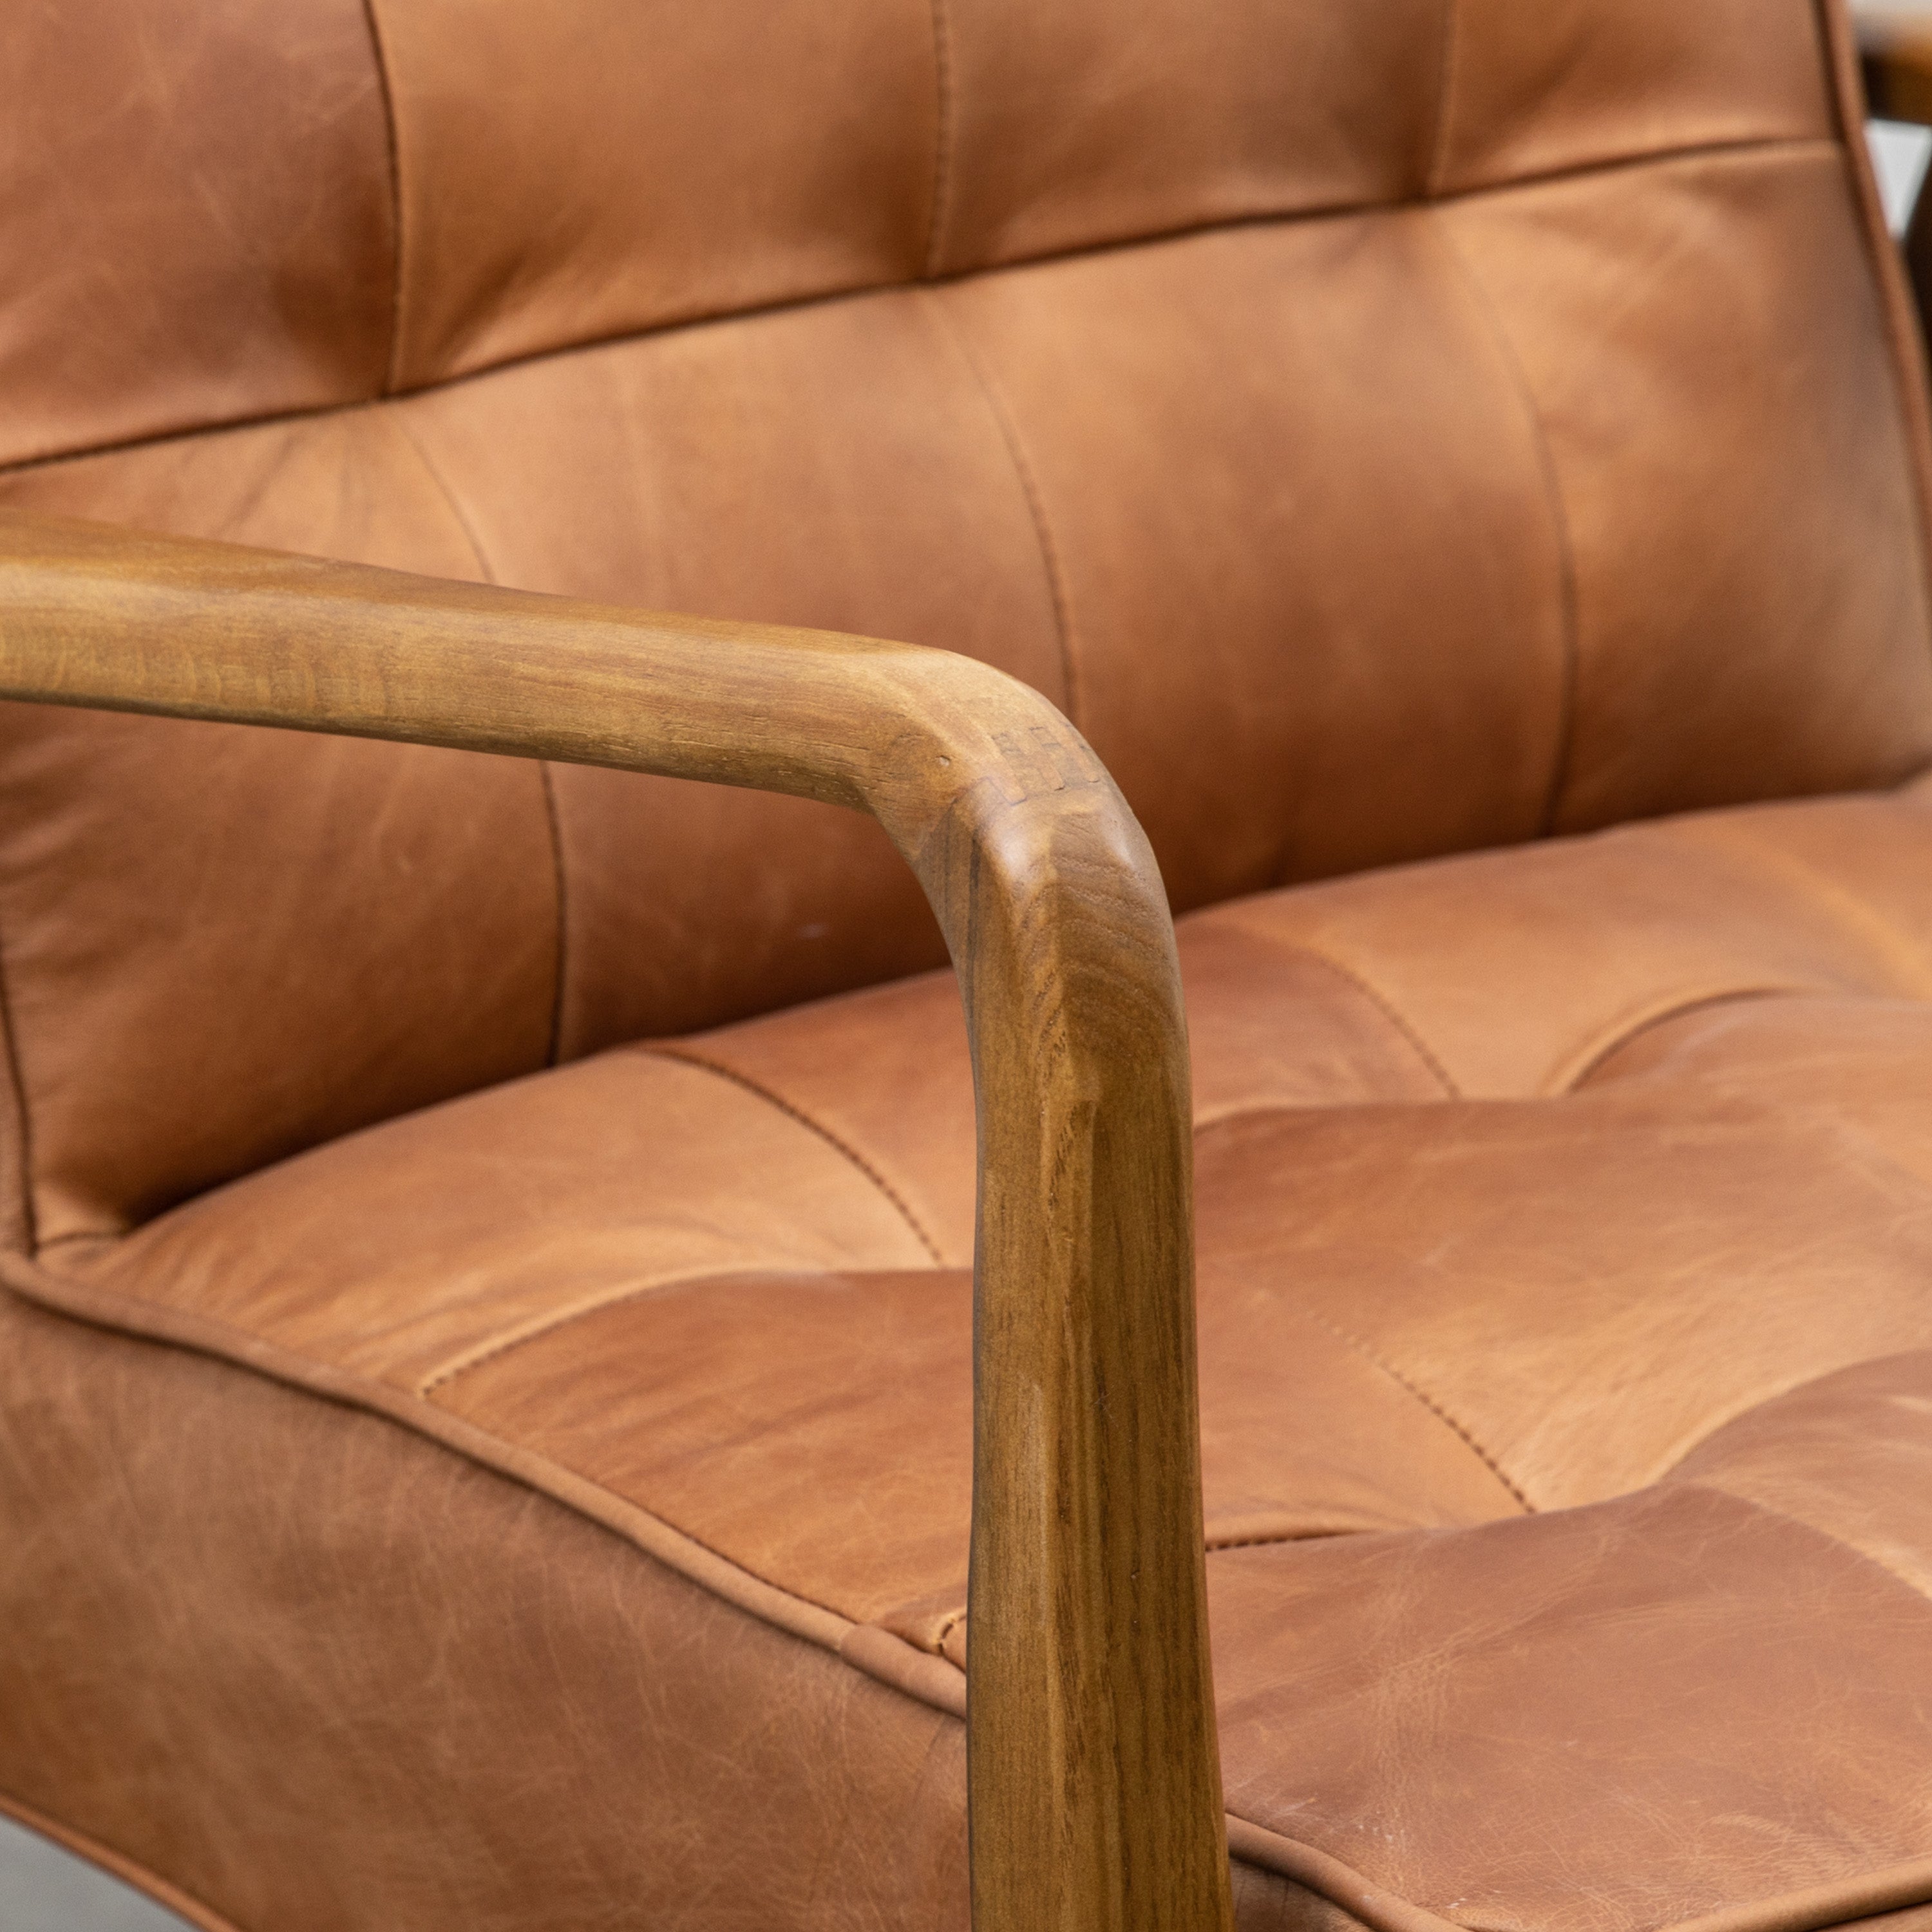 Ronson Mid Century Armchair with solid oak frame and top grain vintage brown leather upholstery | MalletandPlane.com